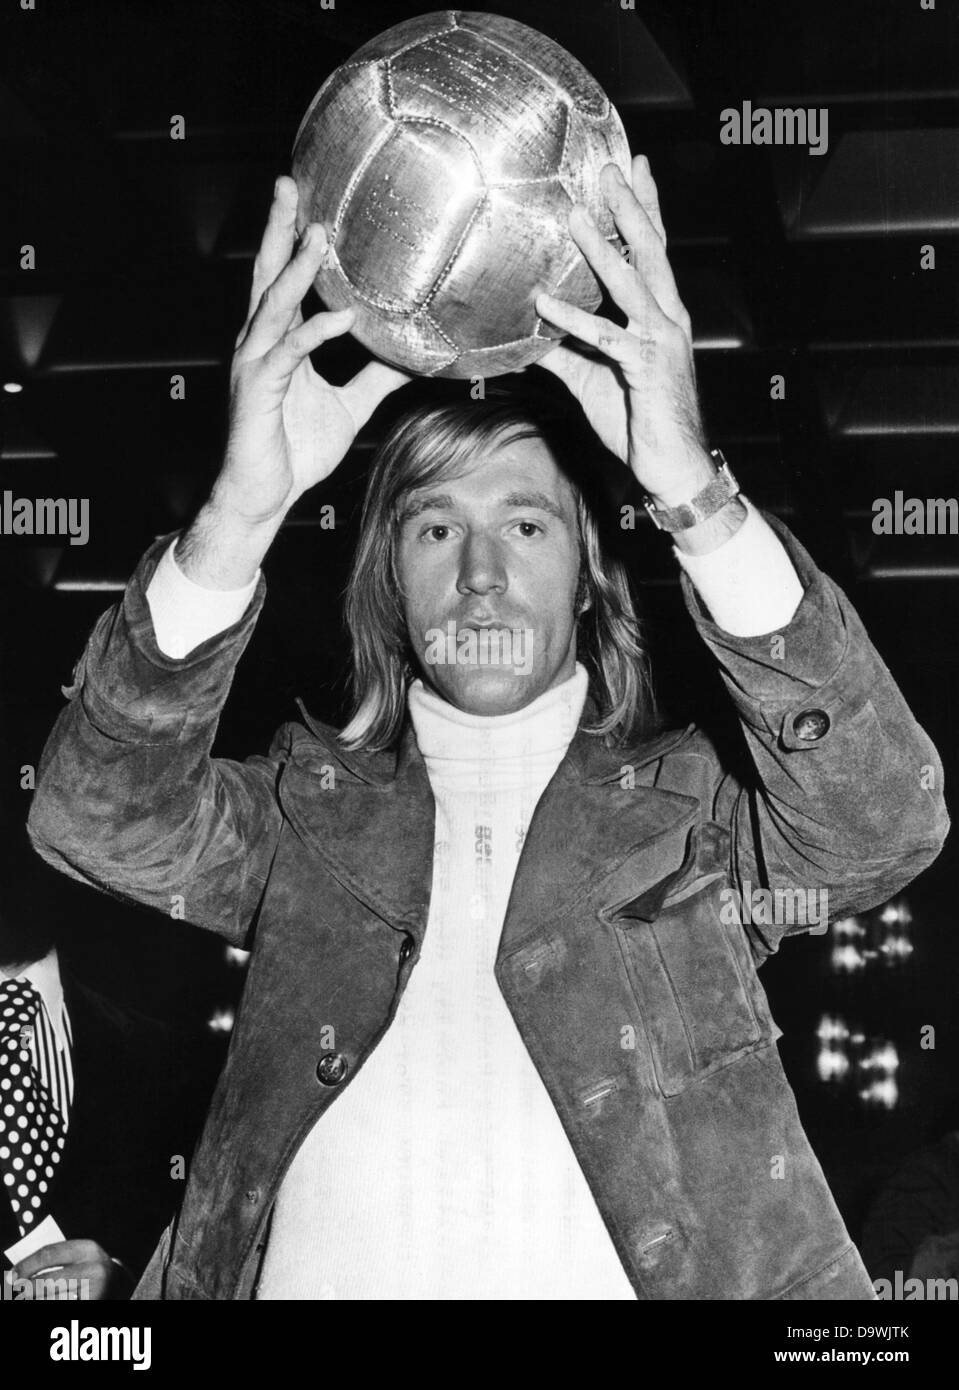 Germany's 'Soccer player of the Year 1972', Günter Netzer, holds up the 'Golden Football', which was awarded to Brazilian soccer star Pele in 1969 for his 1000th goal. Stock Photo